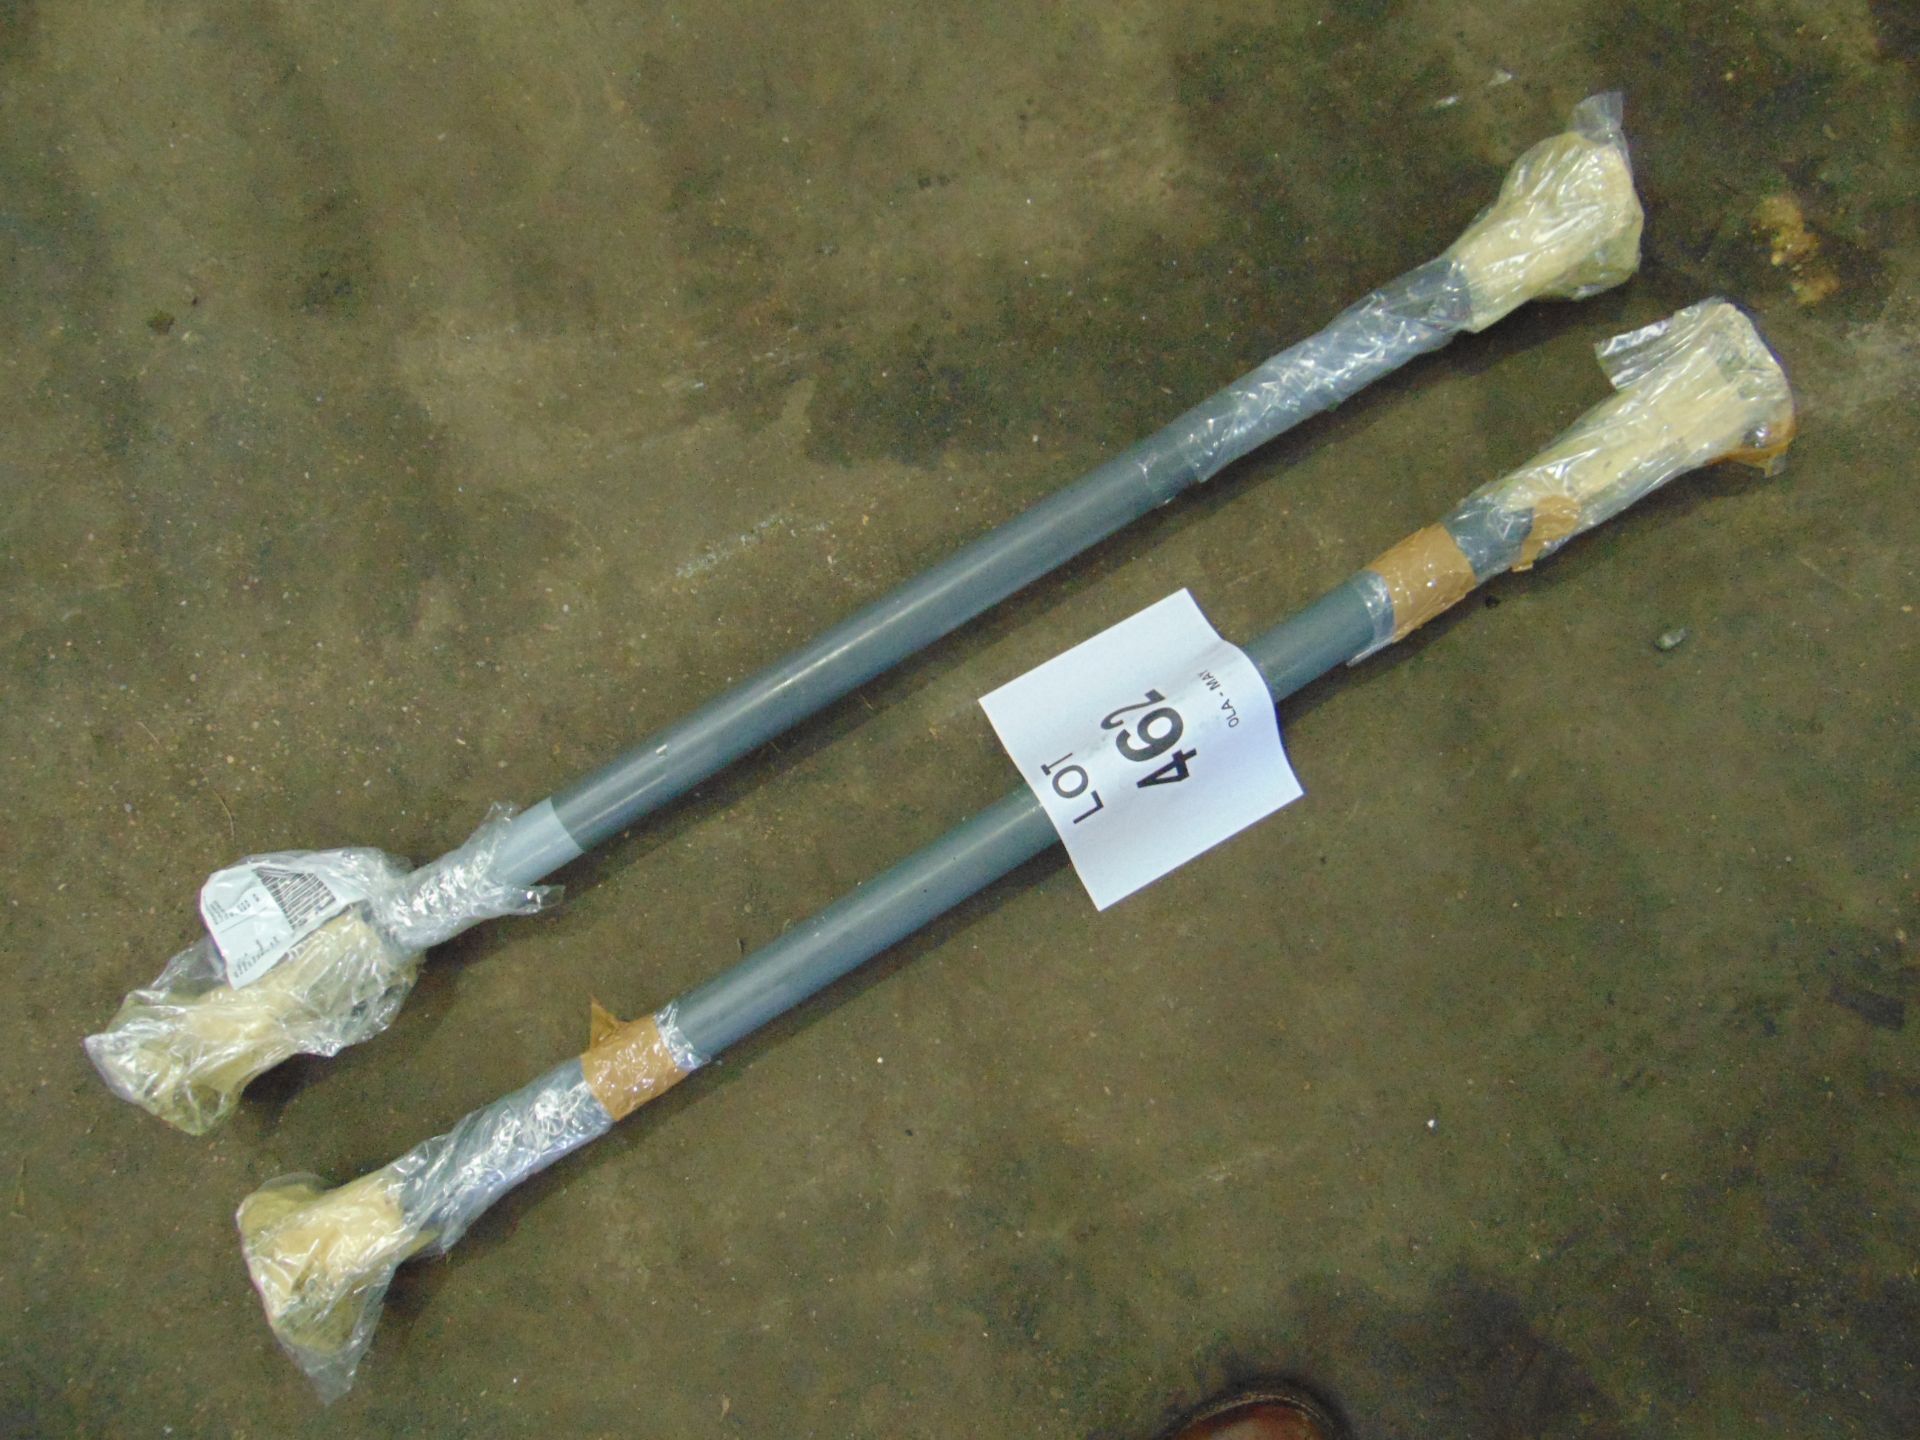 GAZELLE SHAFT INCLINED X2 PART N. 341A34-3100-0100 - Image 2 of 3